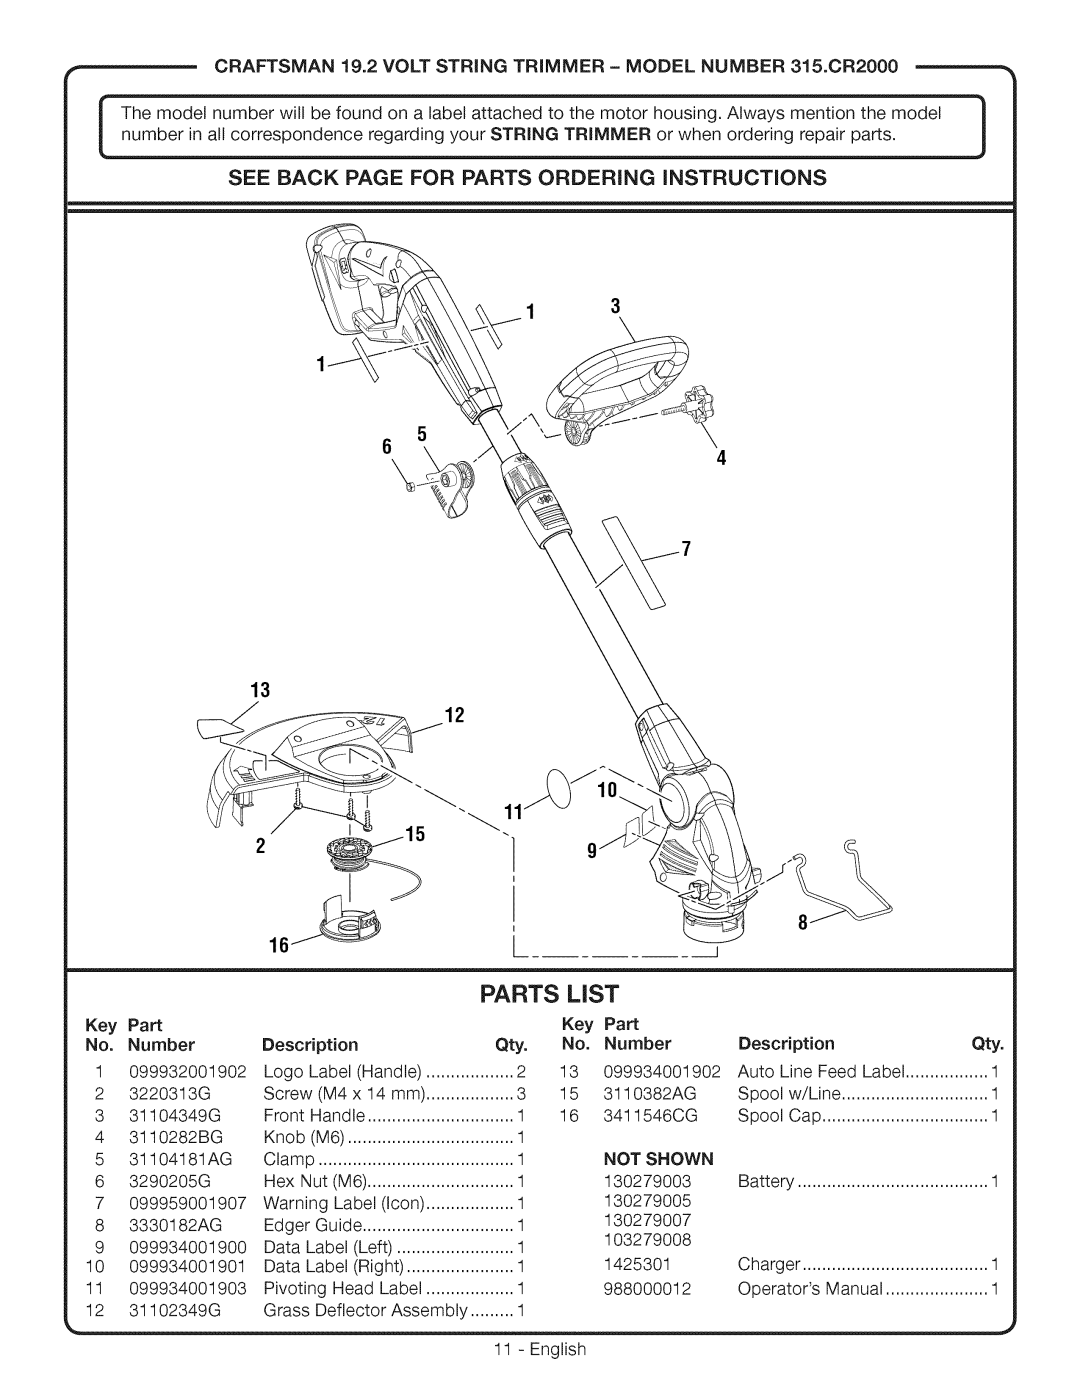 Craftsman 315.CR2000 manual List, See Back Page For Parts Ordering Instructions, Description, Not Shown 